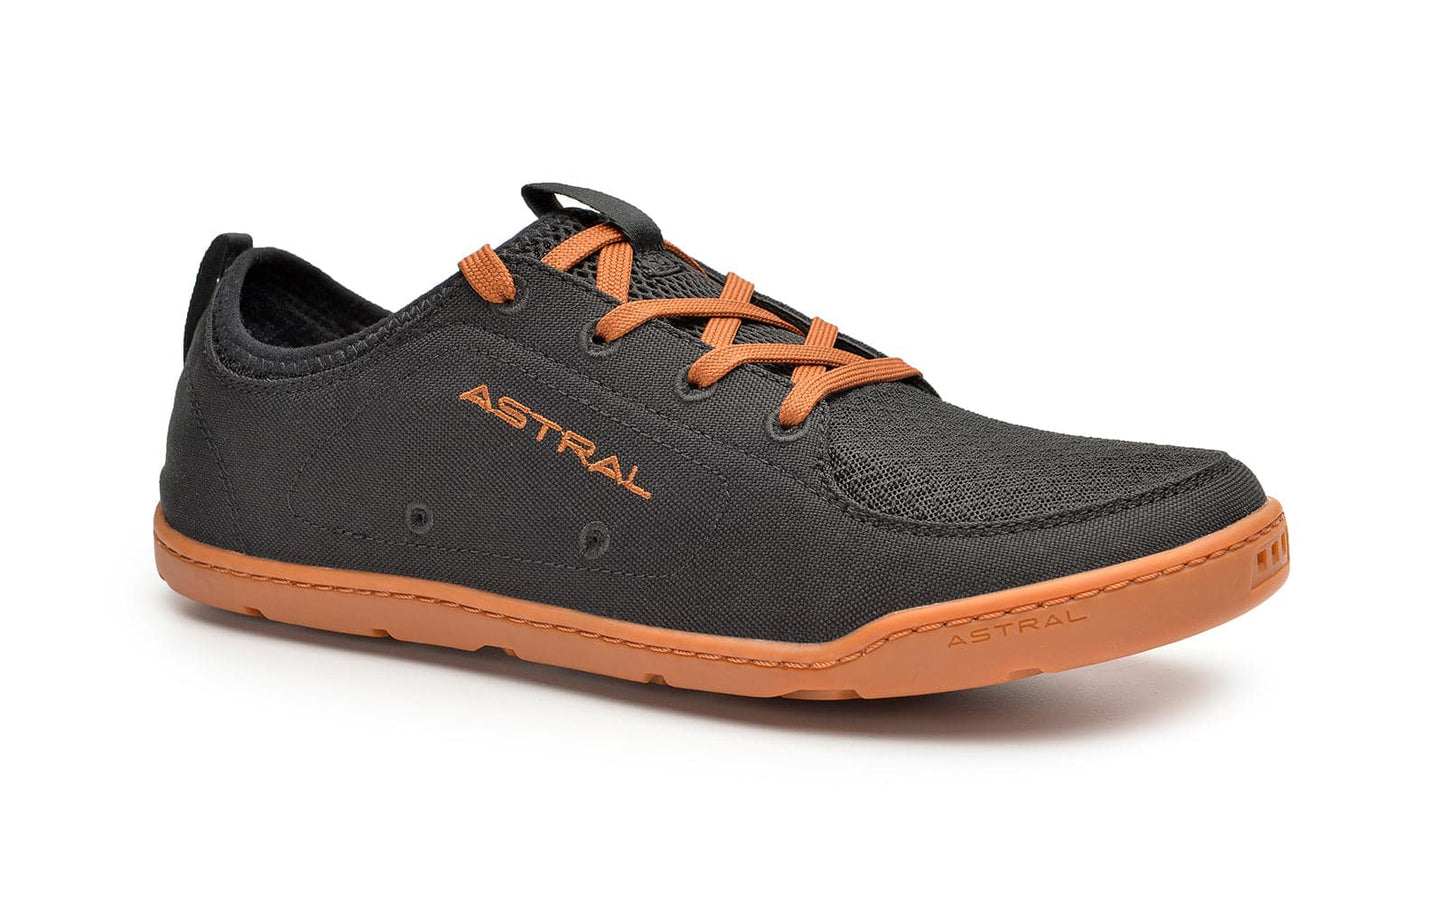 Featuring the Loyak - Men's men's footwear manufactured by Astral shown here from a second angle.